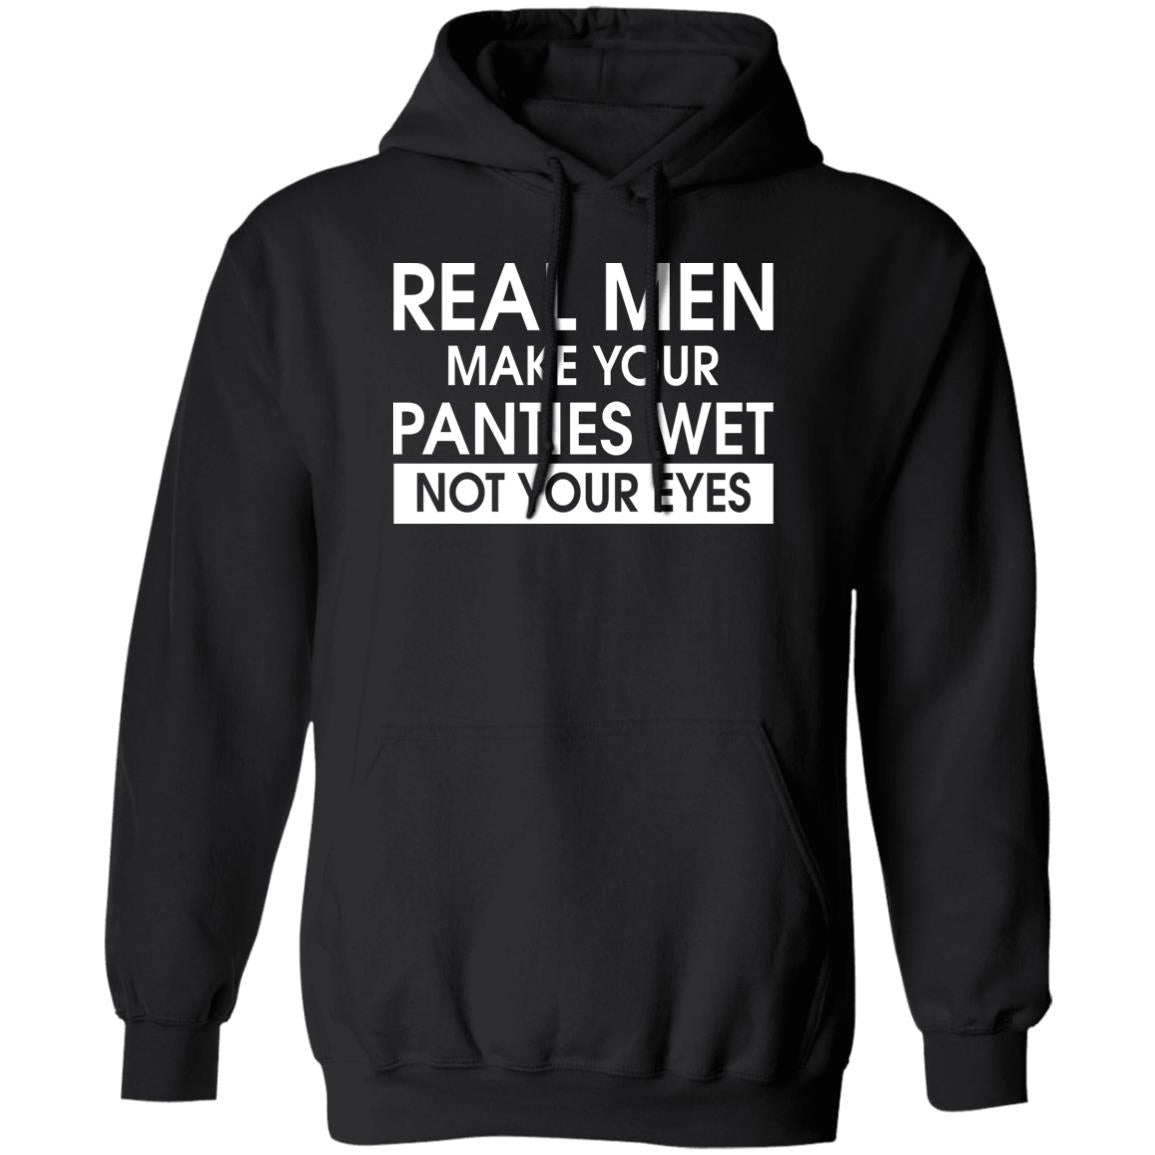 Real Men Make Your Panties Wet Not Your Eyes v3 - Stylish Sublimation  Digital Download - Create with Confidence